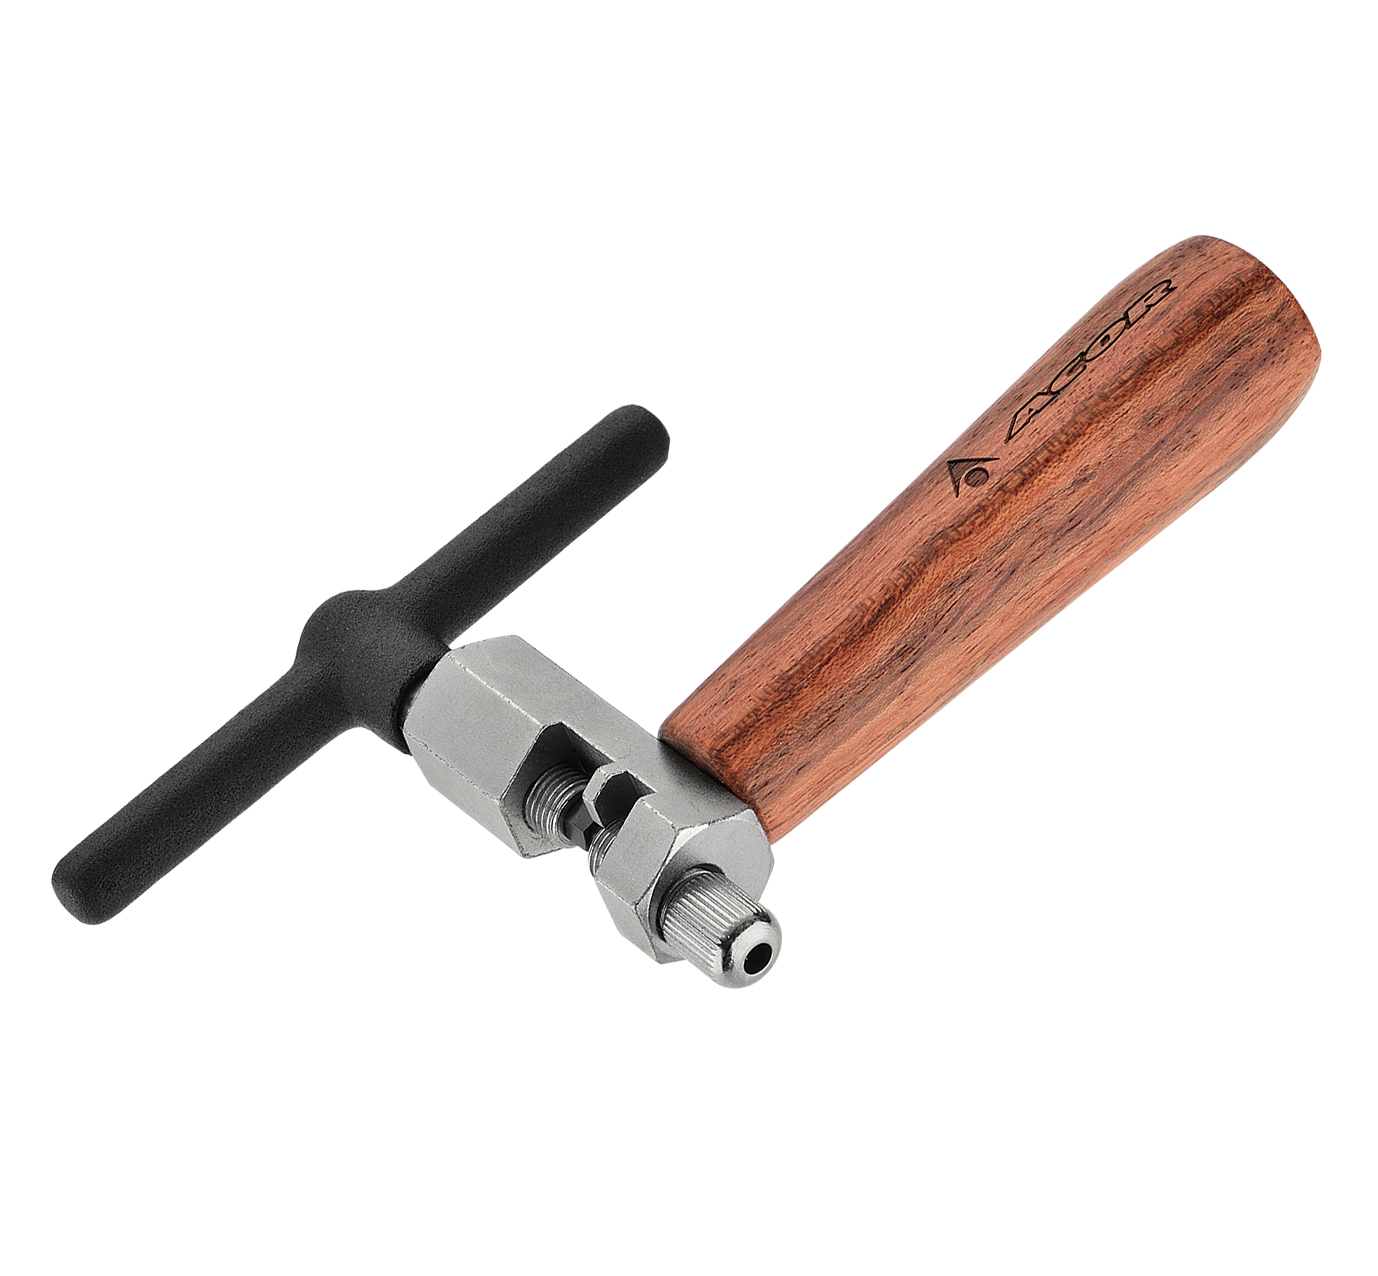 ATL21914 Acor Chain Tool With Wooden Handle (Up To 11 SPD)